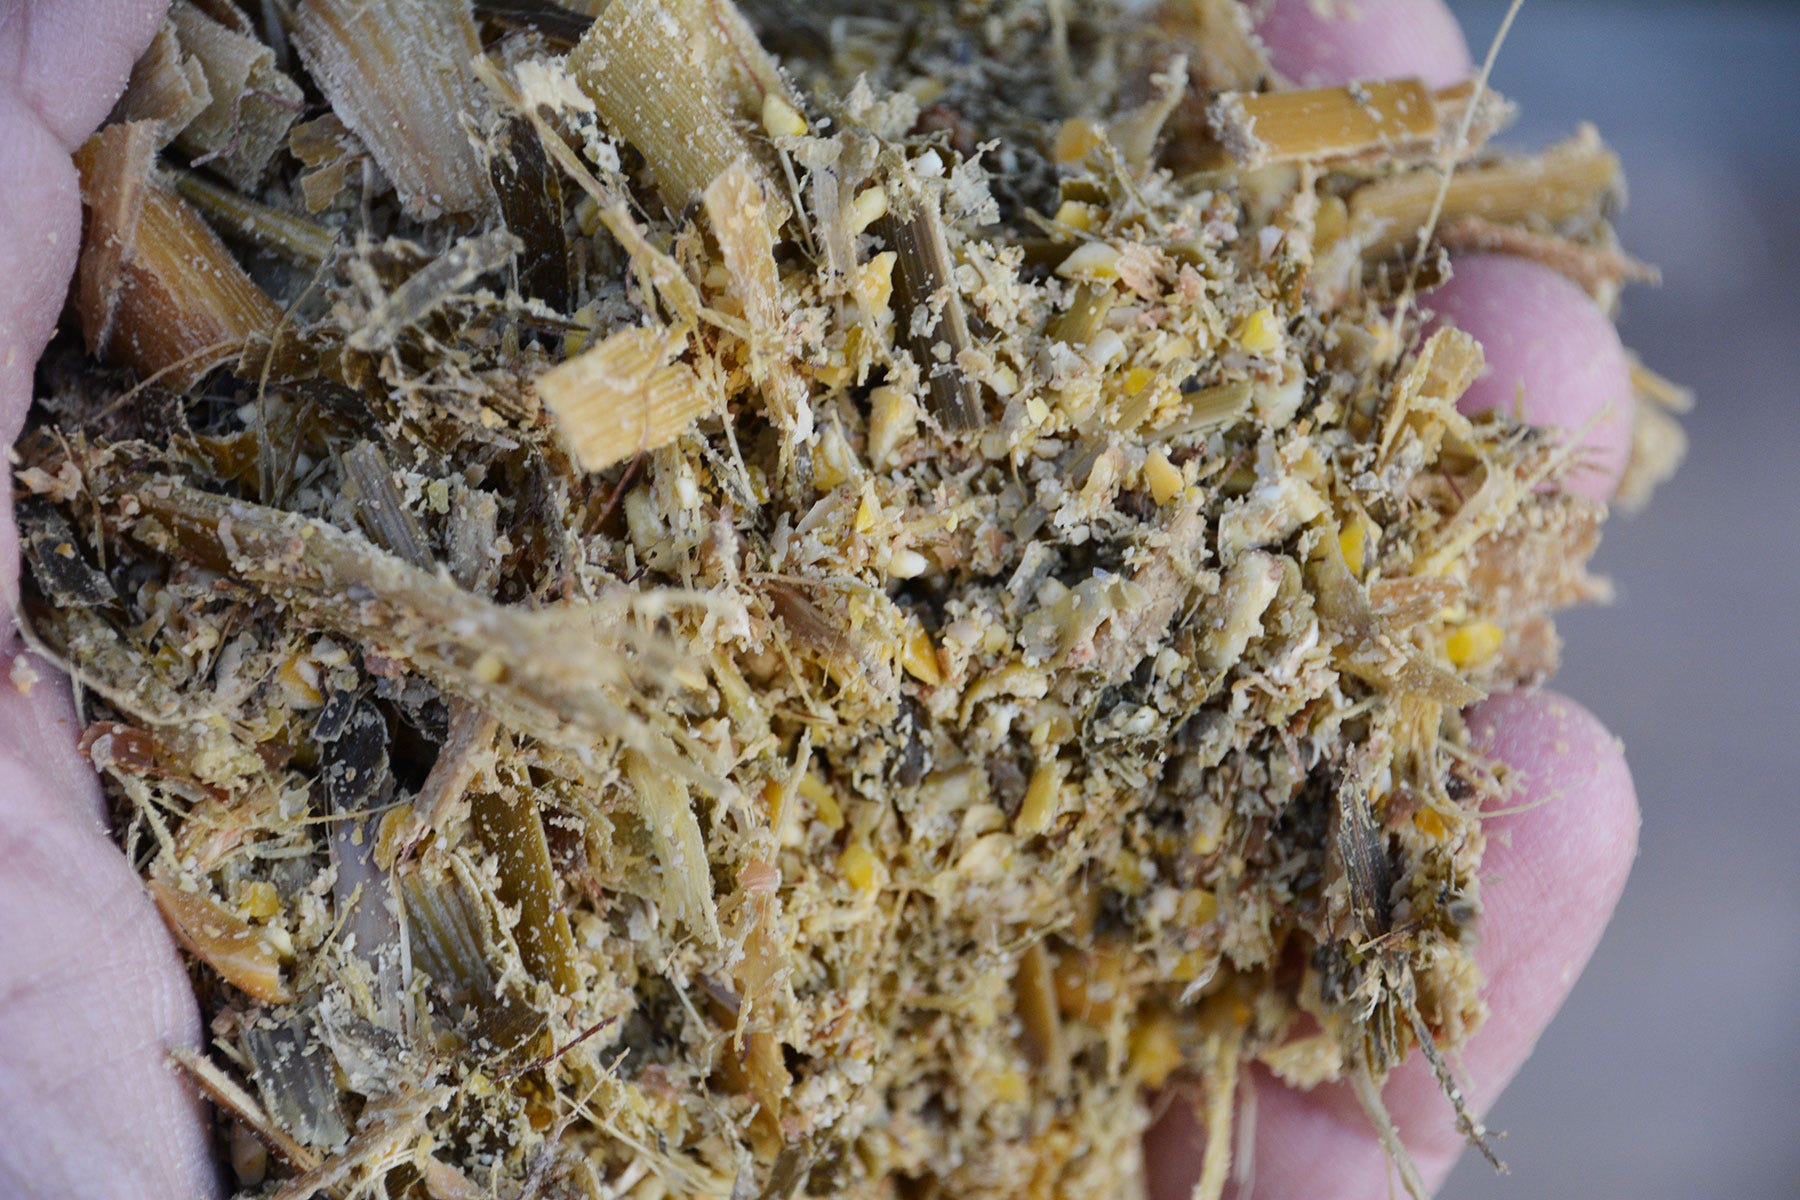 A close-up of forage and supplement mix fed to cattlemix